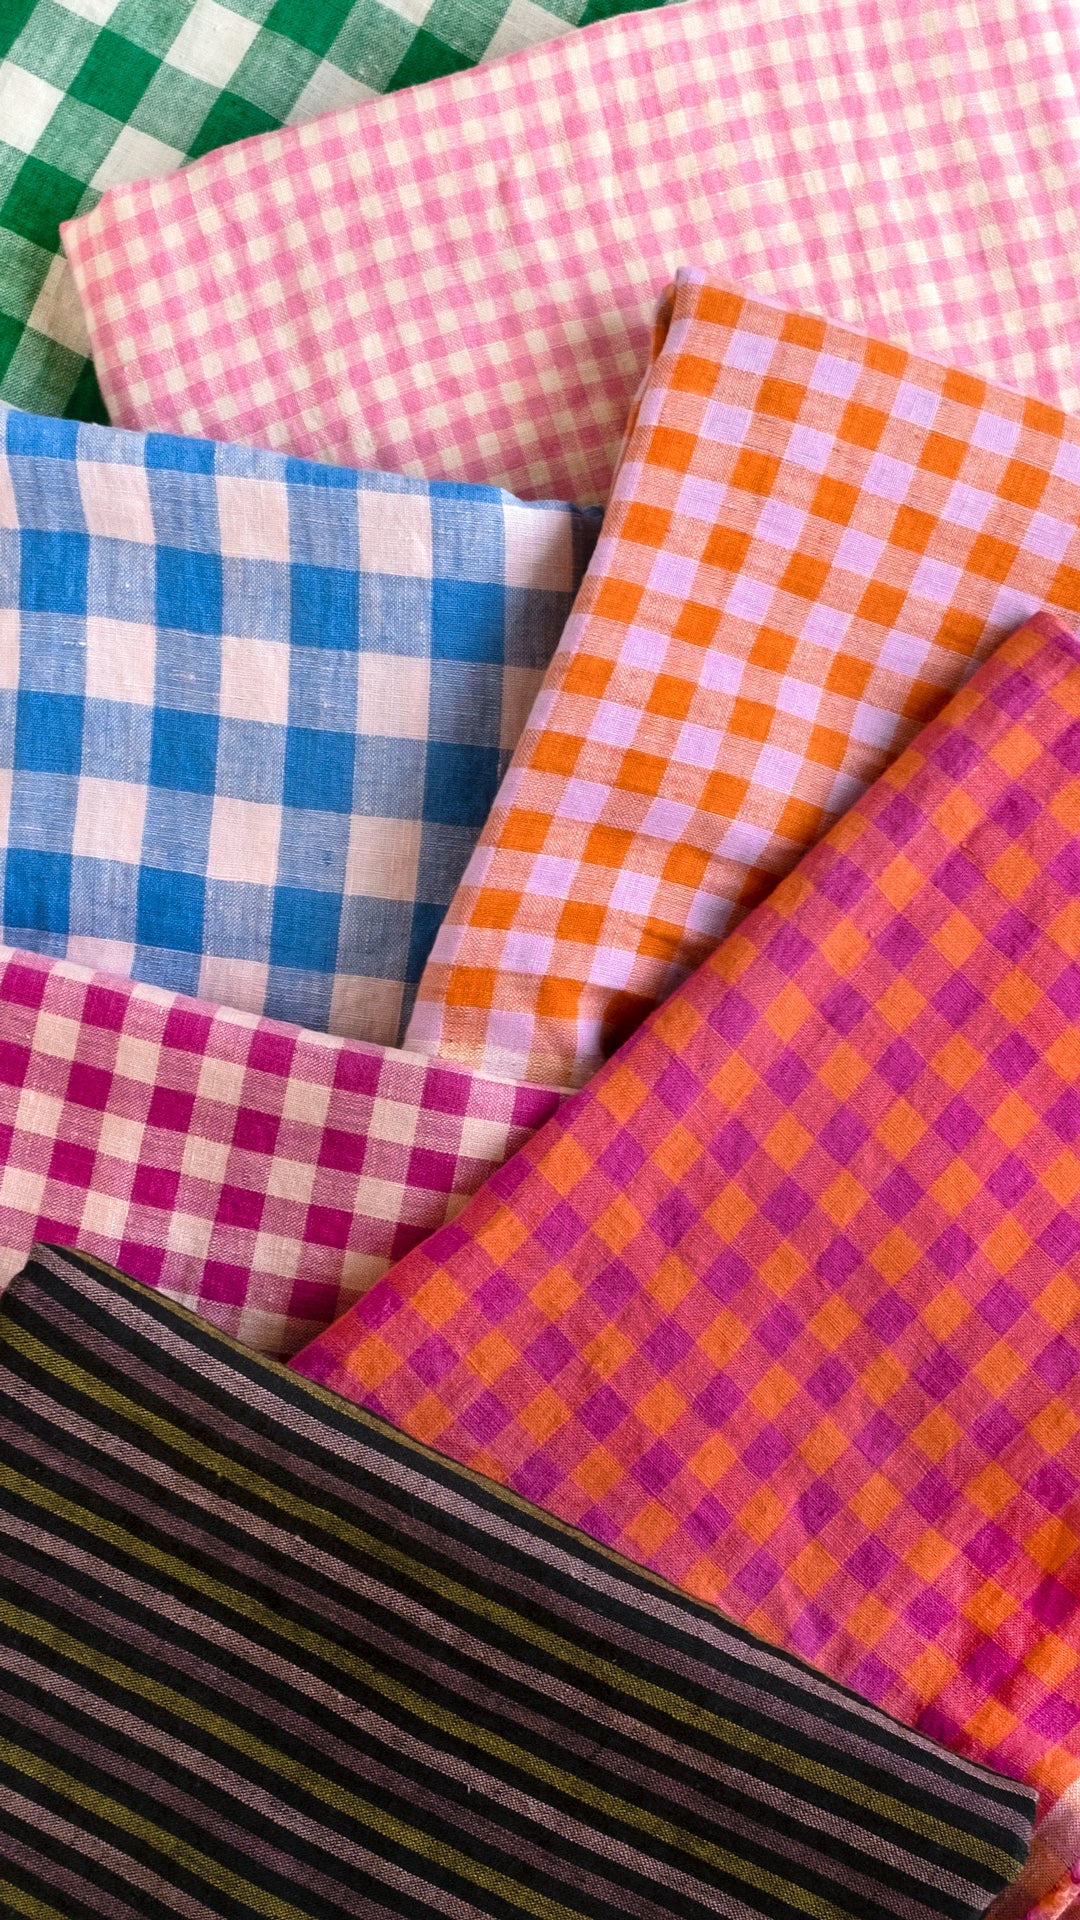 Best Fabric Suppliers and Shop  Buy Fabric Material Online – The Fabric  Guys